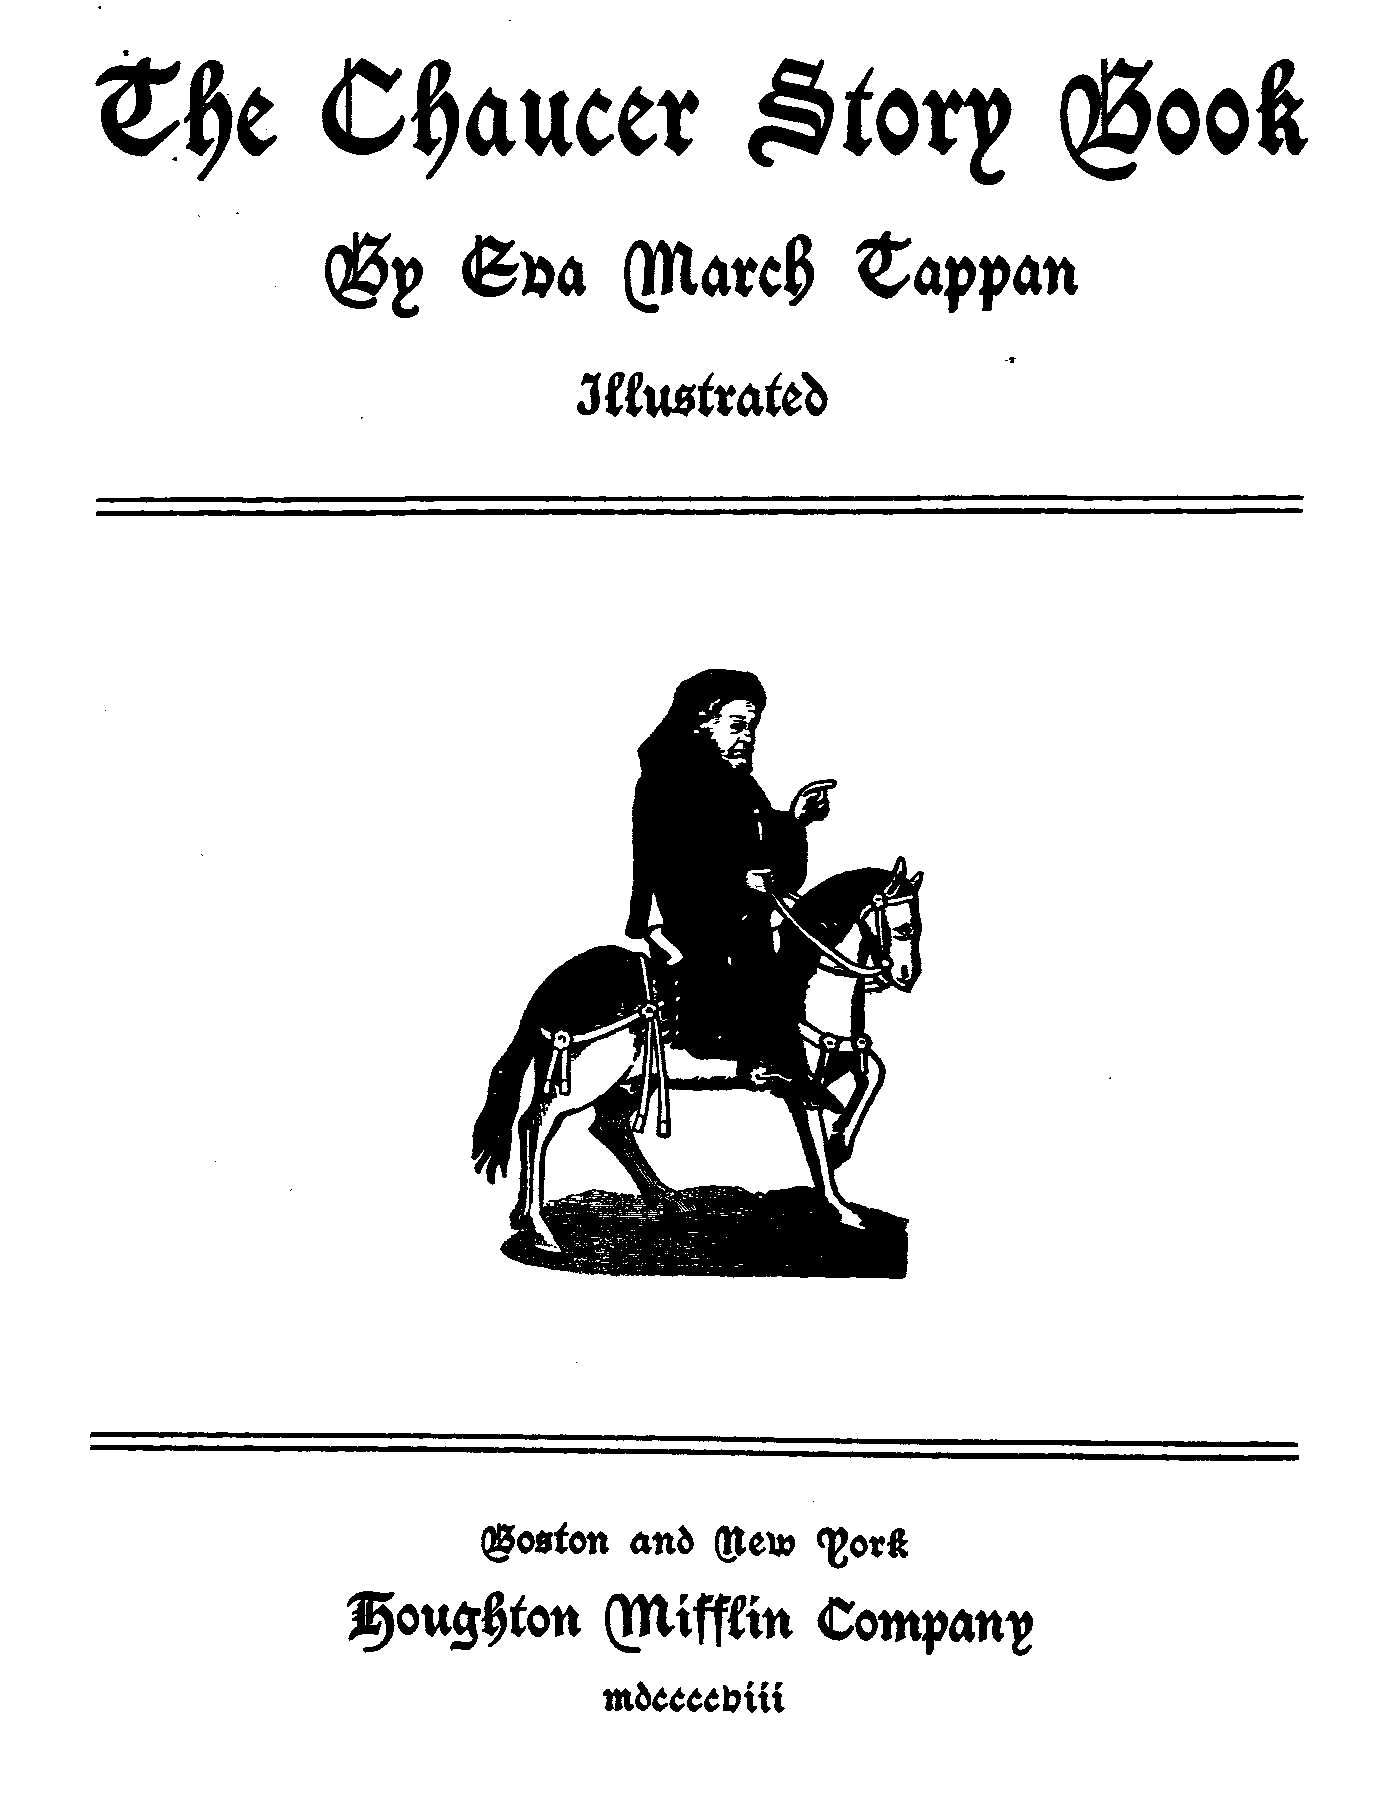 [Title Page] from The Chaucer Story Book by E. M. Tappan